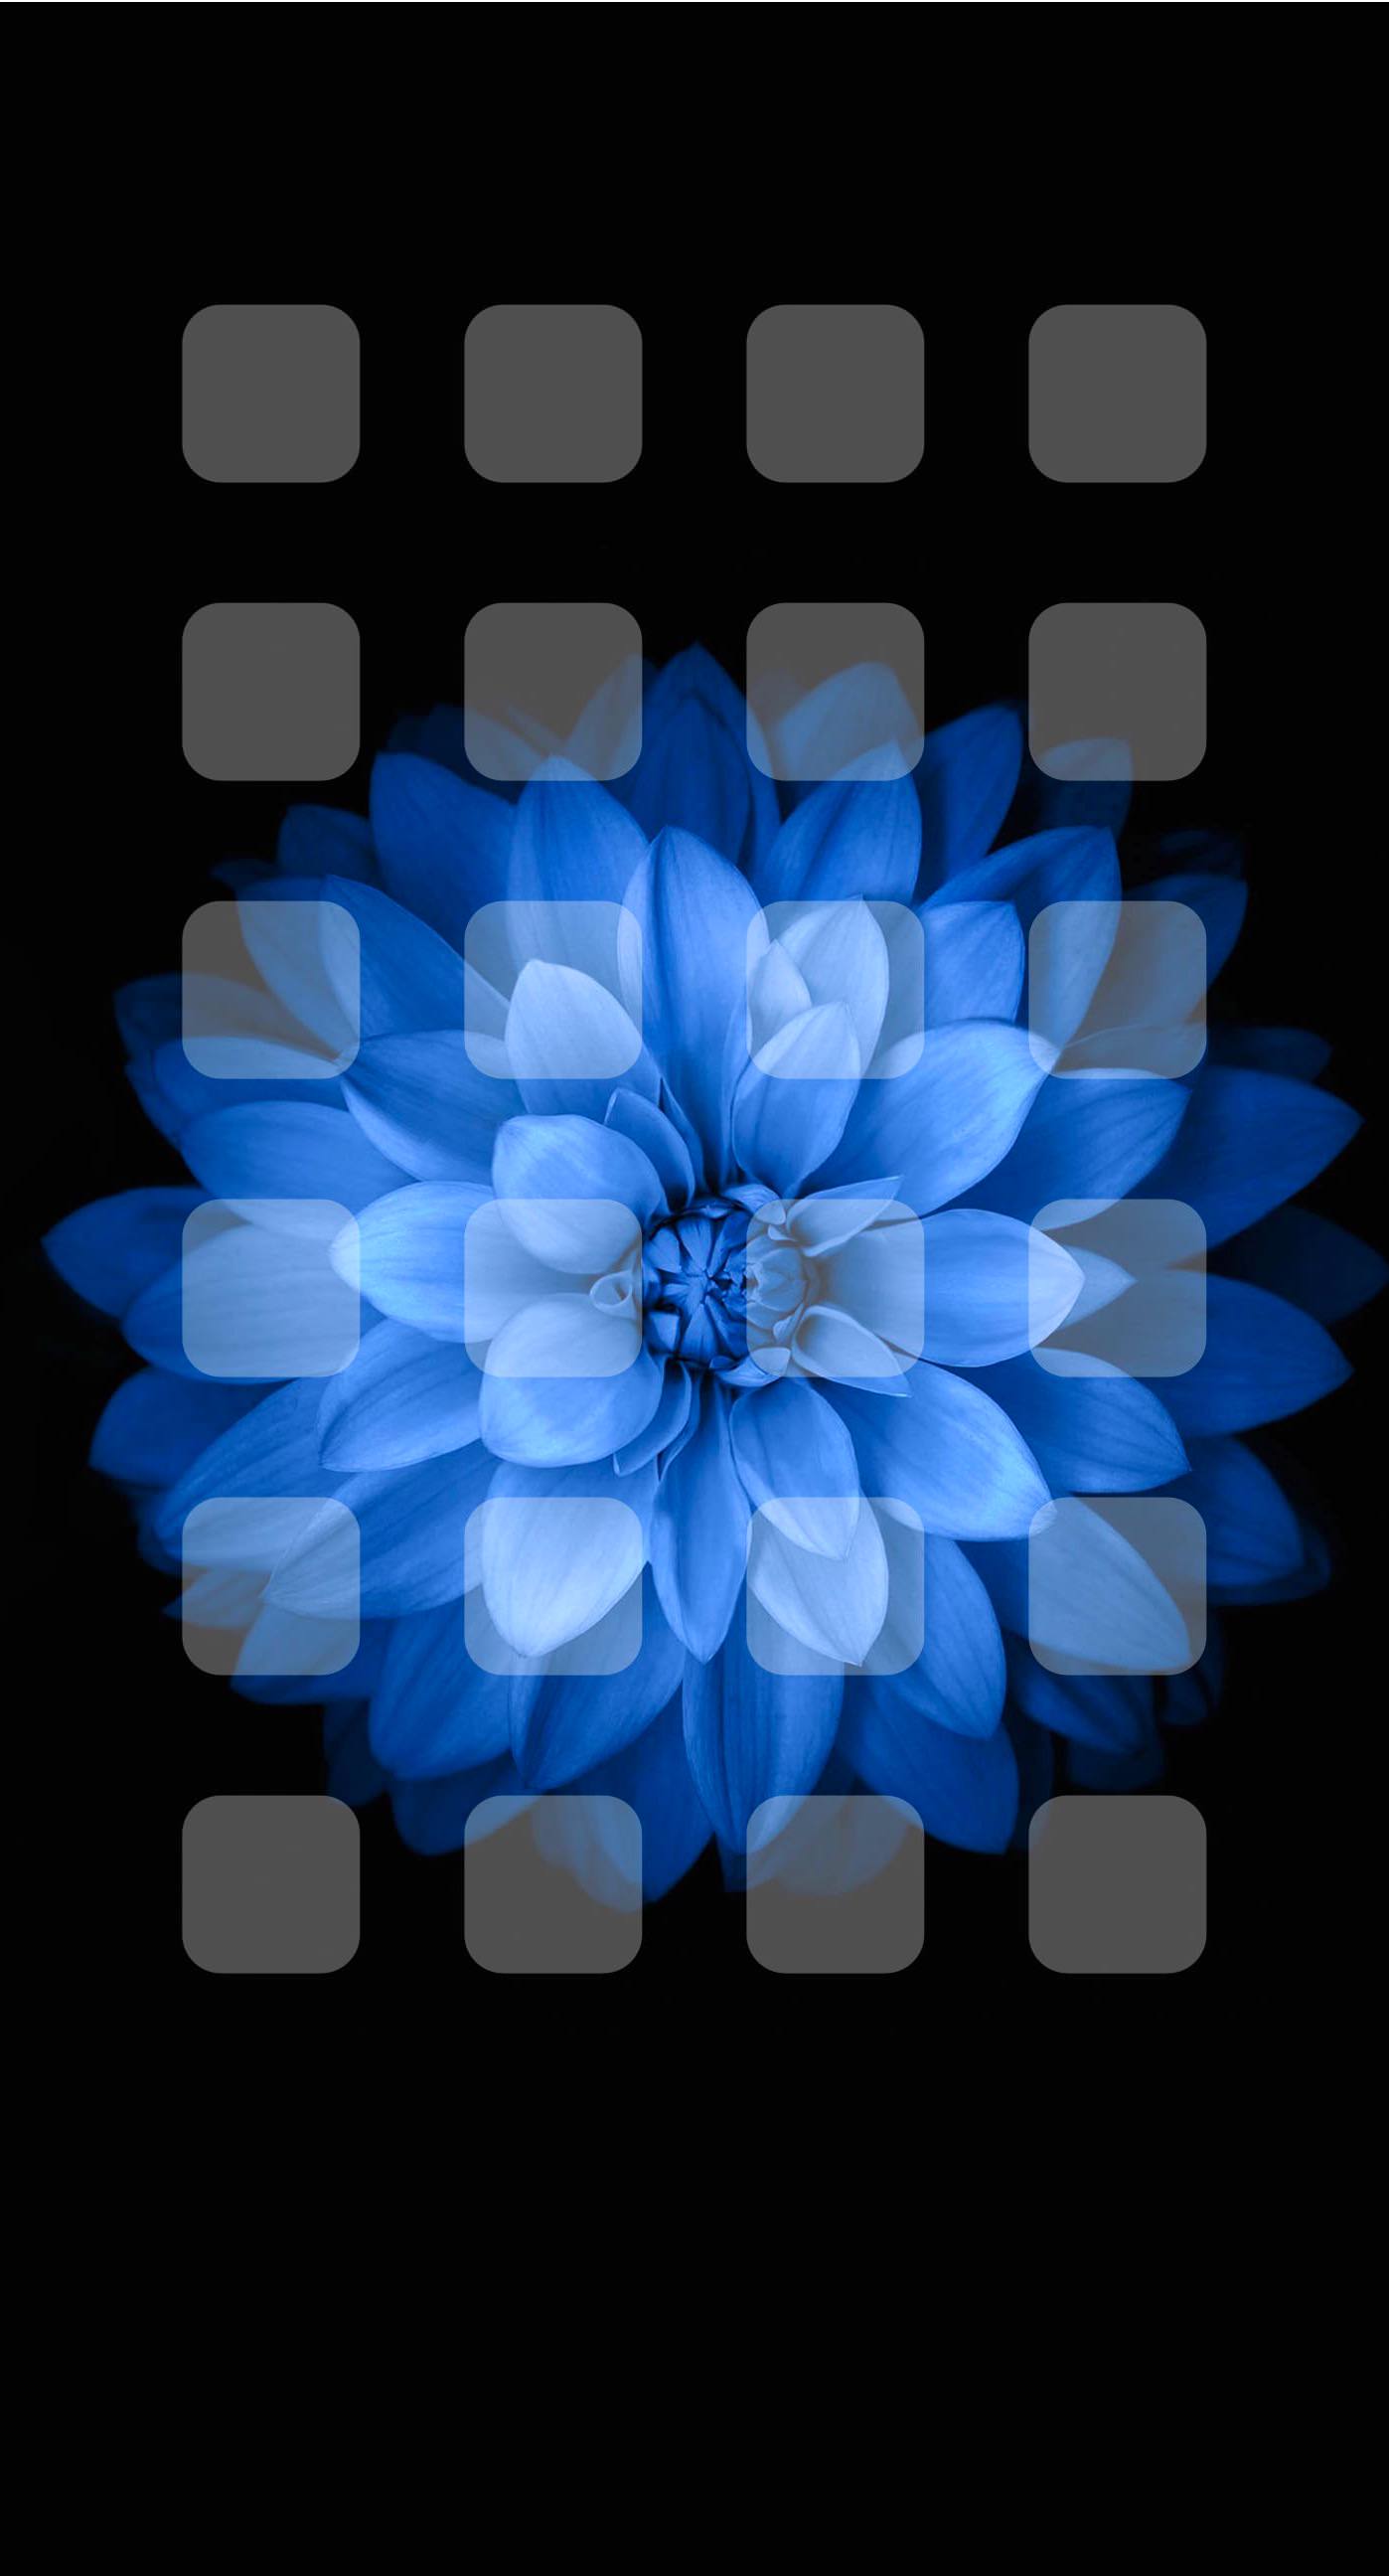 Blue Black And White Flower Shelf Wallpapersc Iphone8plus